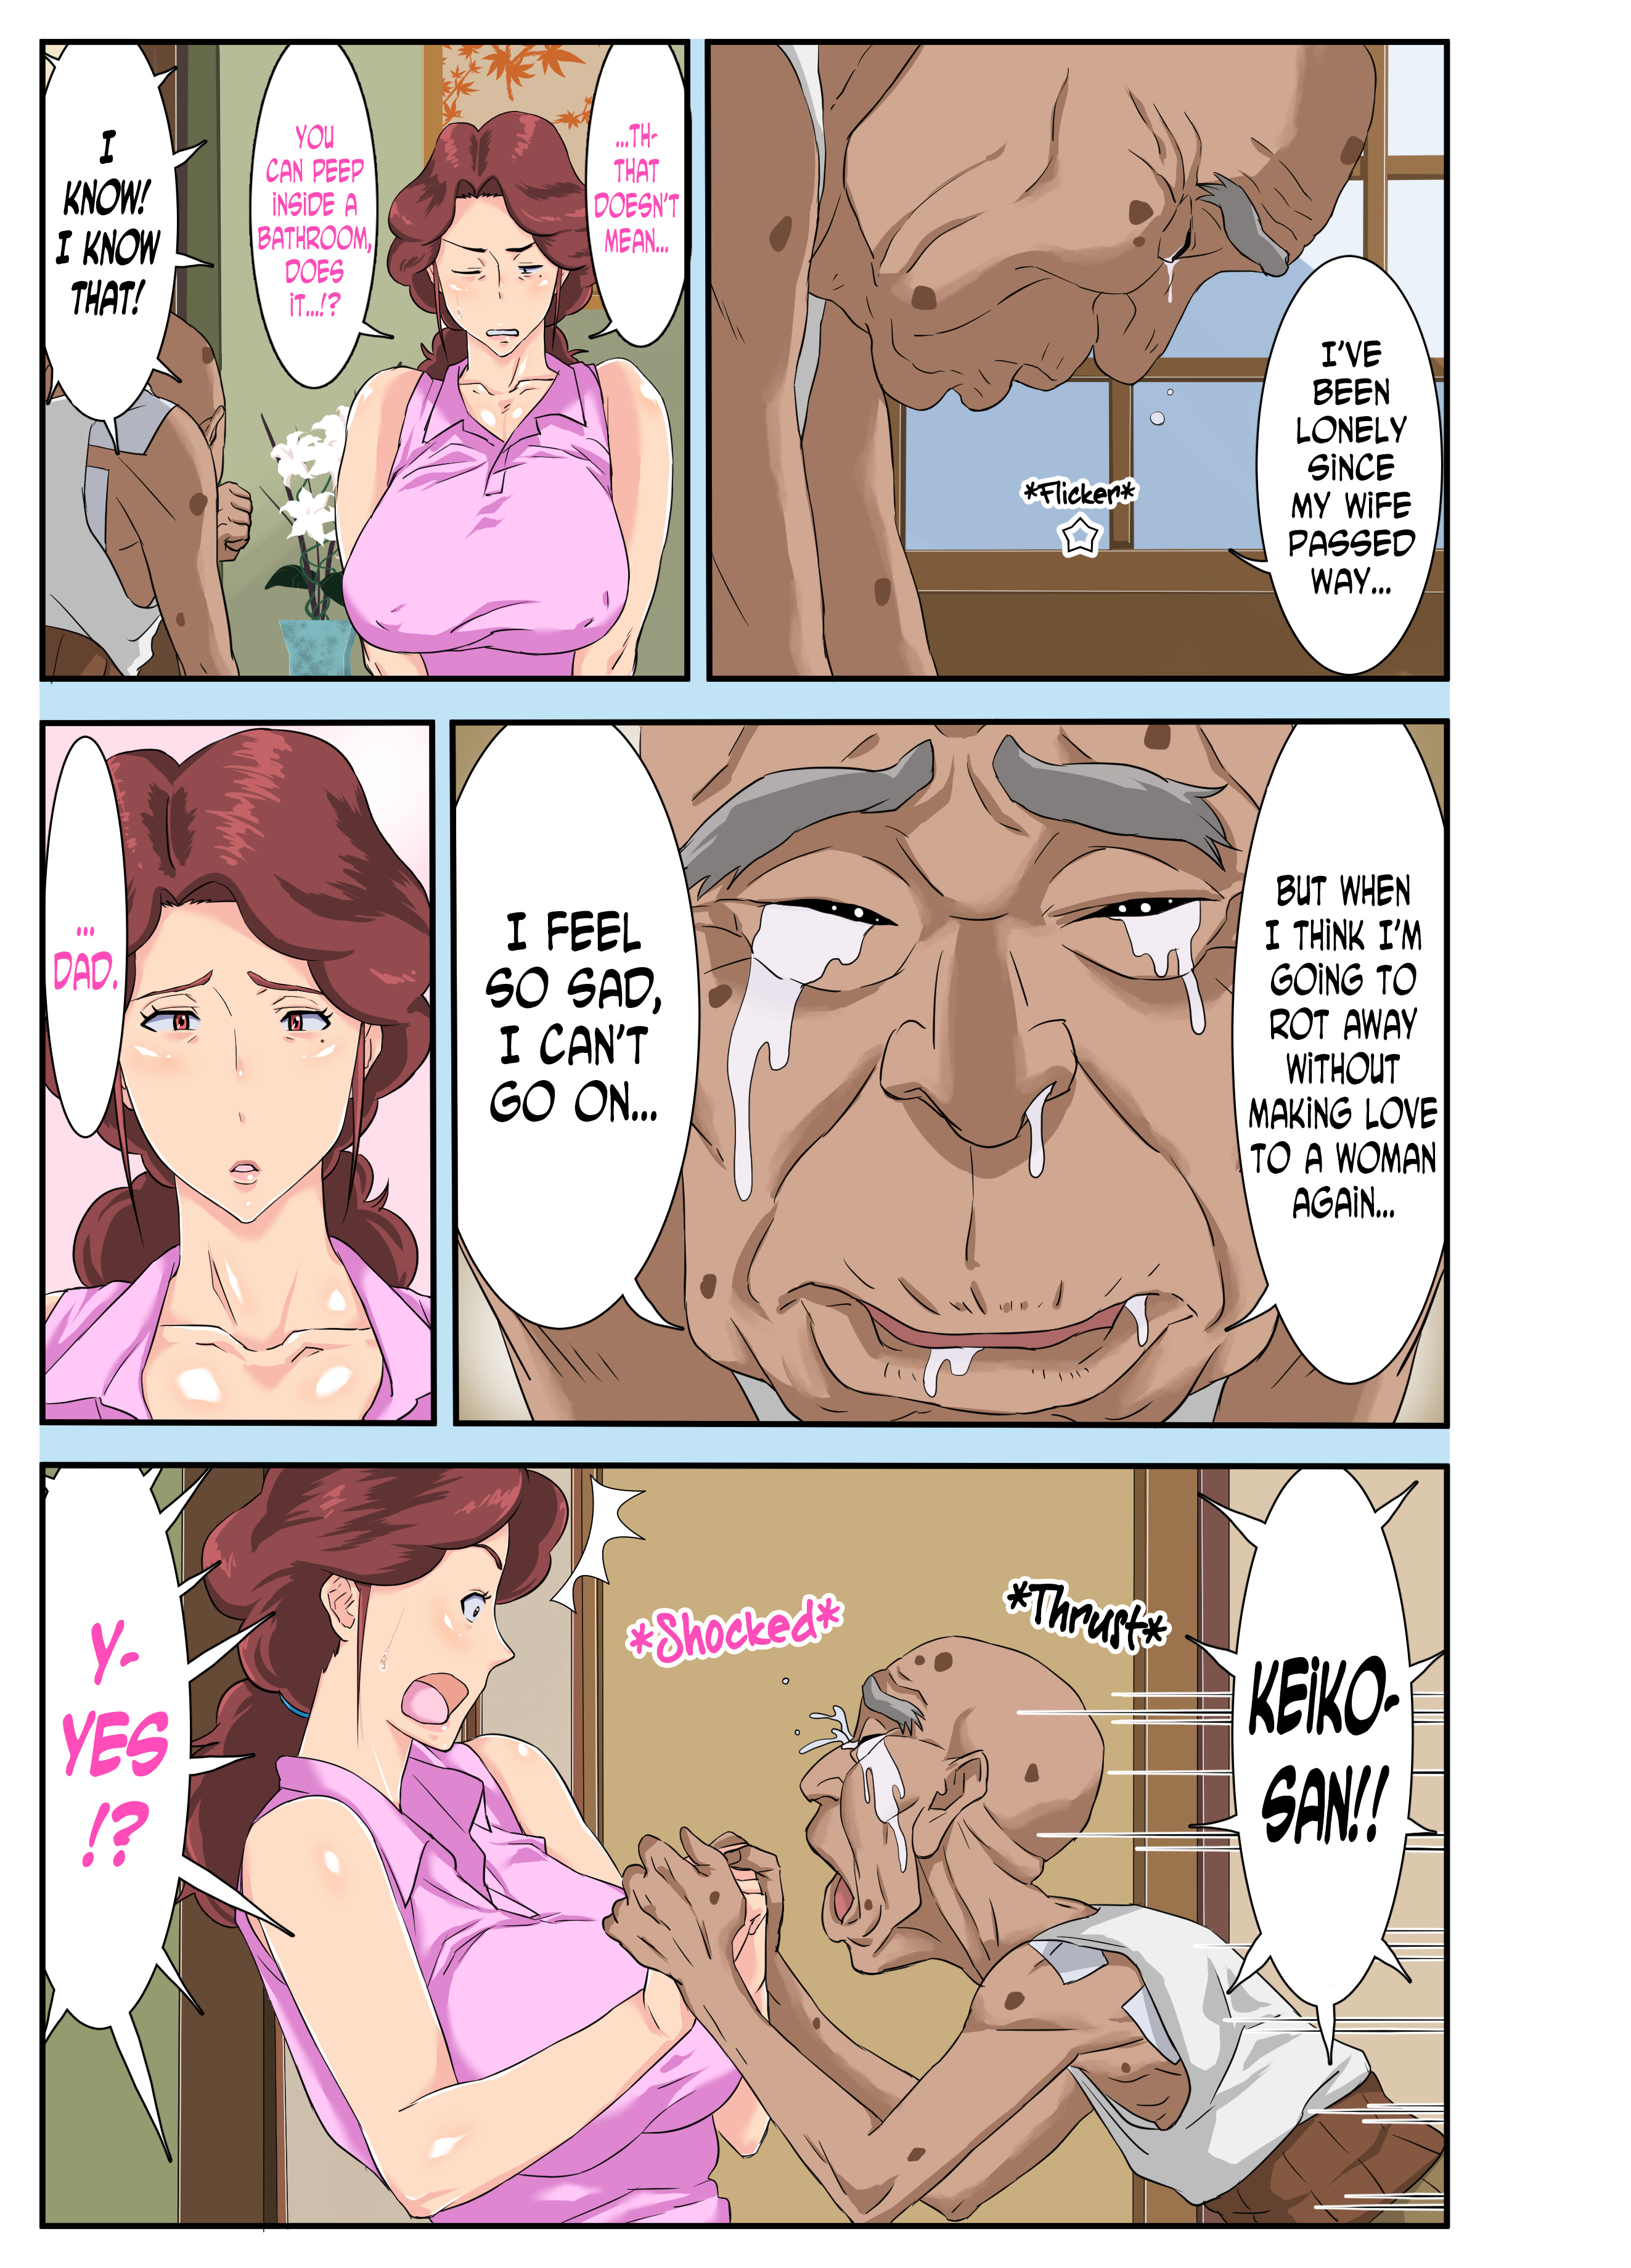 Dirty old man fucks his busty daughter while her husband sleeps - sex comics image